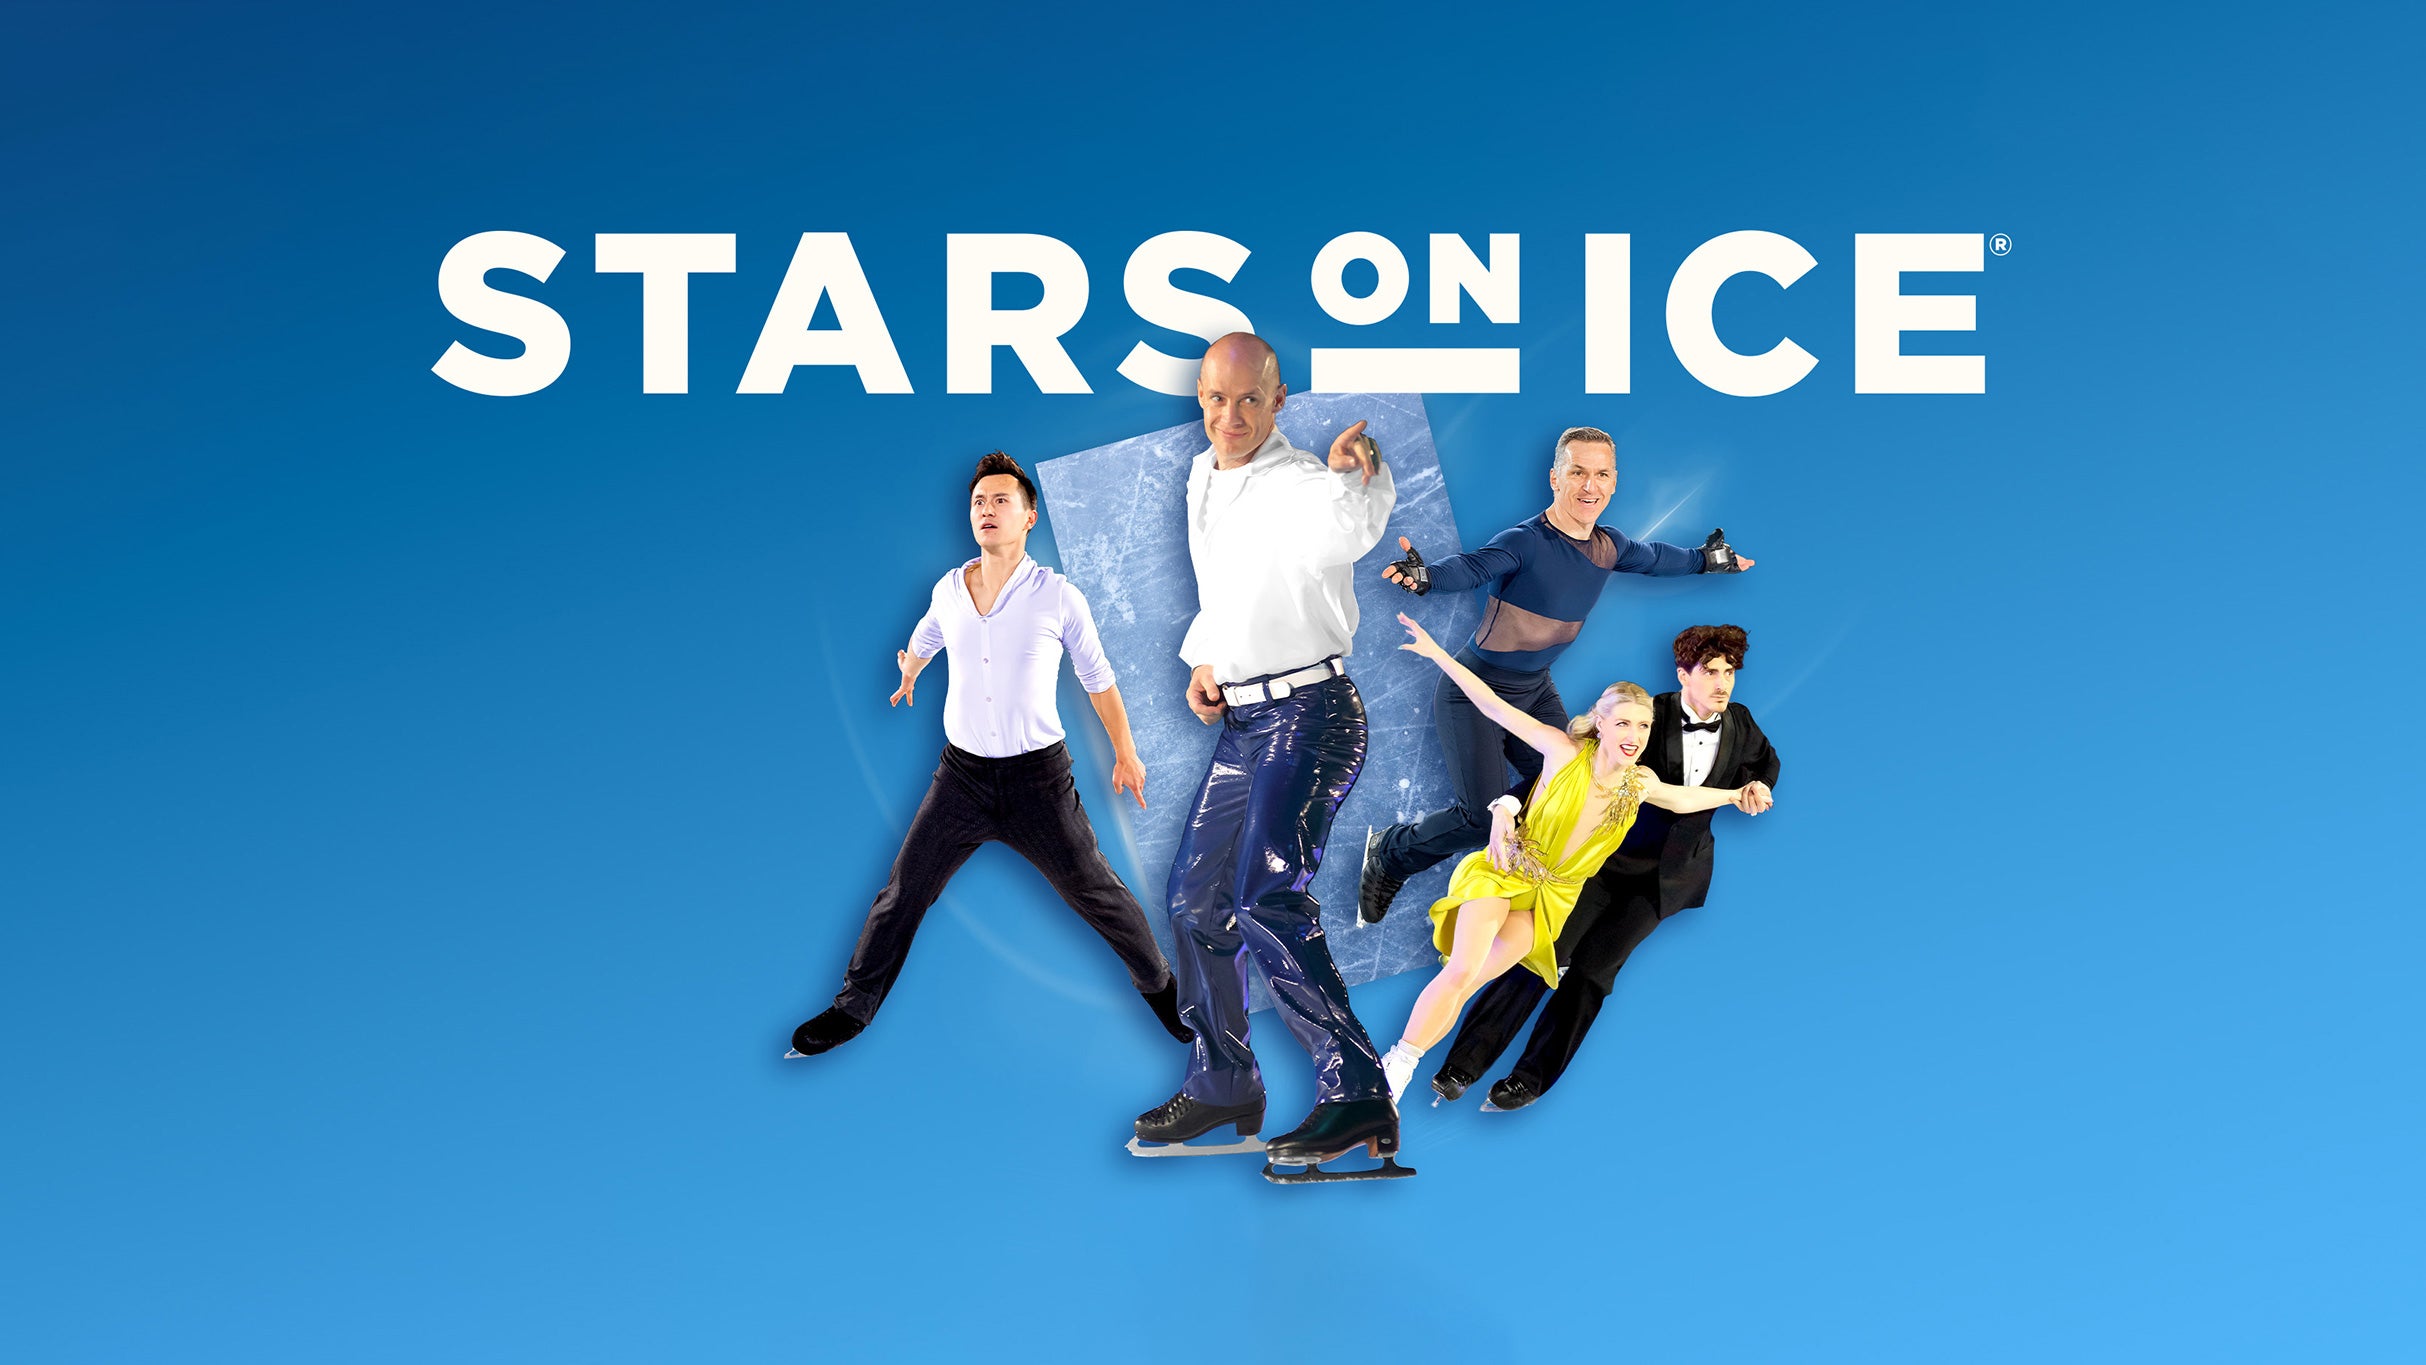 Stars on Ice - Canada in Kanata promo photo for Various presale offer code